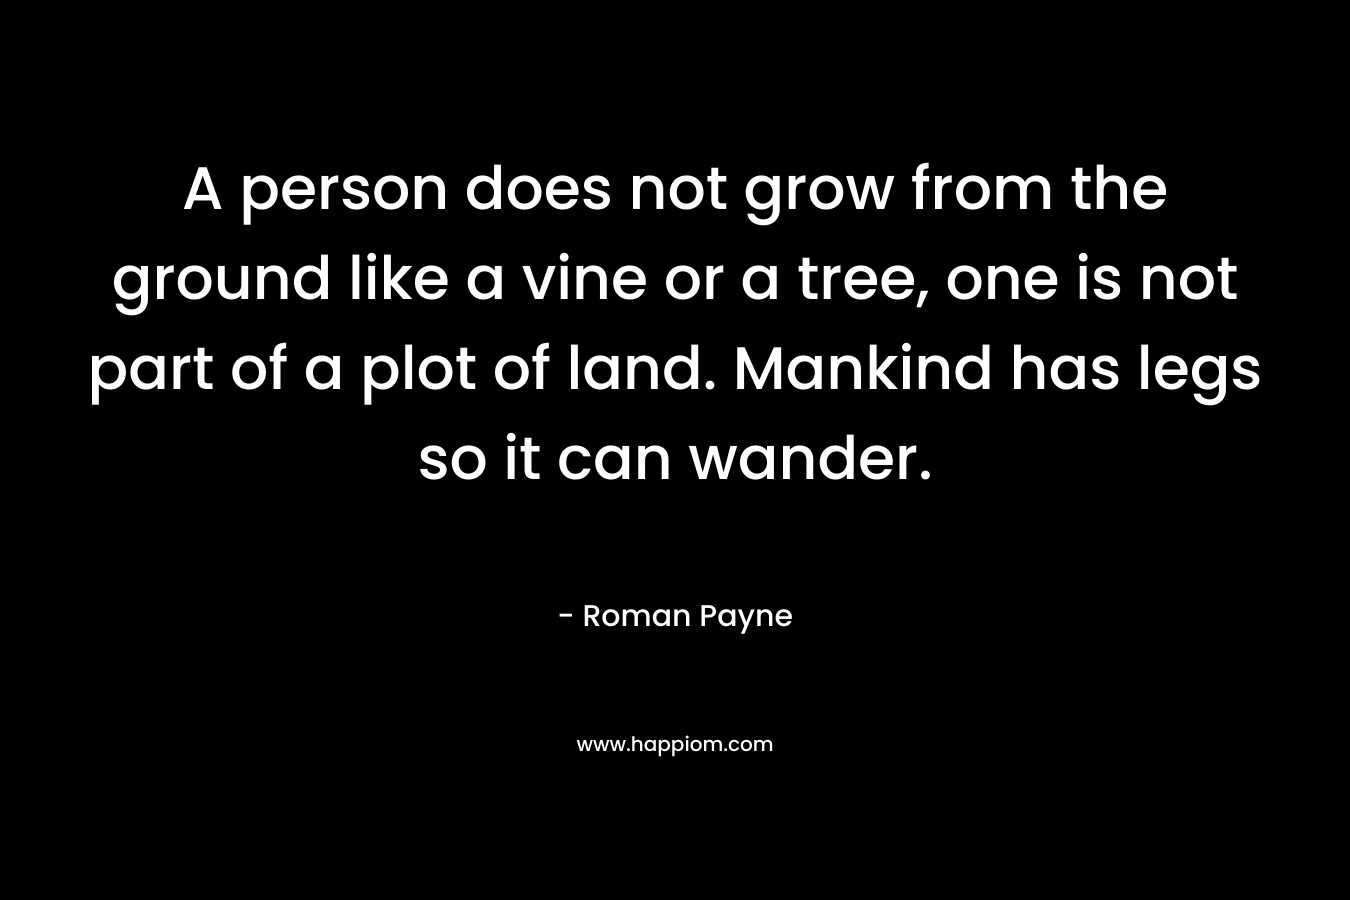 A person does not grow from the ground like a vine or a tree, one is not part of a plot of land. Mankind has legs so it can wander. – Roman Payne